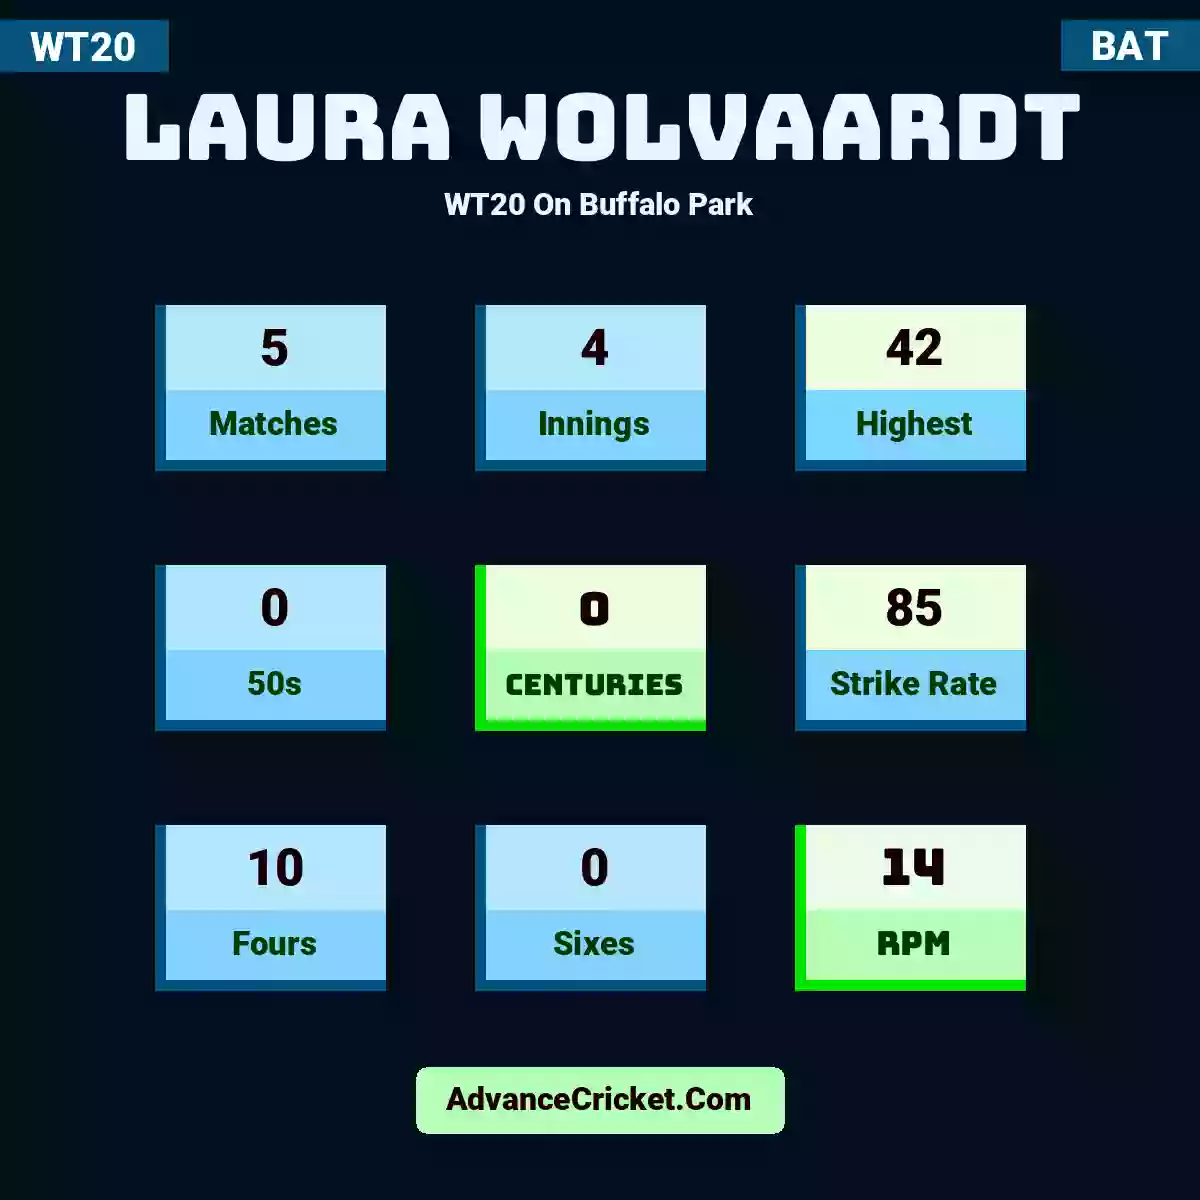 Laura Wolvaardt WT20  On Buffalo Park, Laura Wolvaardt played 5 matches, scored 42 runs as highest, 0 half-centuries, and 0 centuries, with a strike rate of 85. L.Wolvaardt hit 10 fours and 0 sixes, with an RPM of 14.